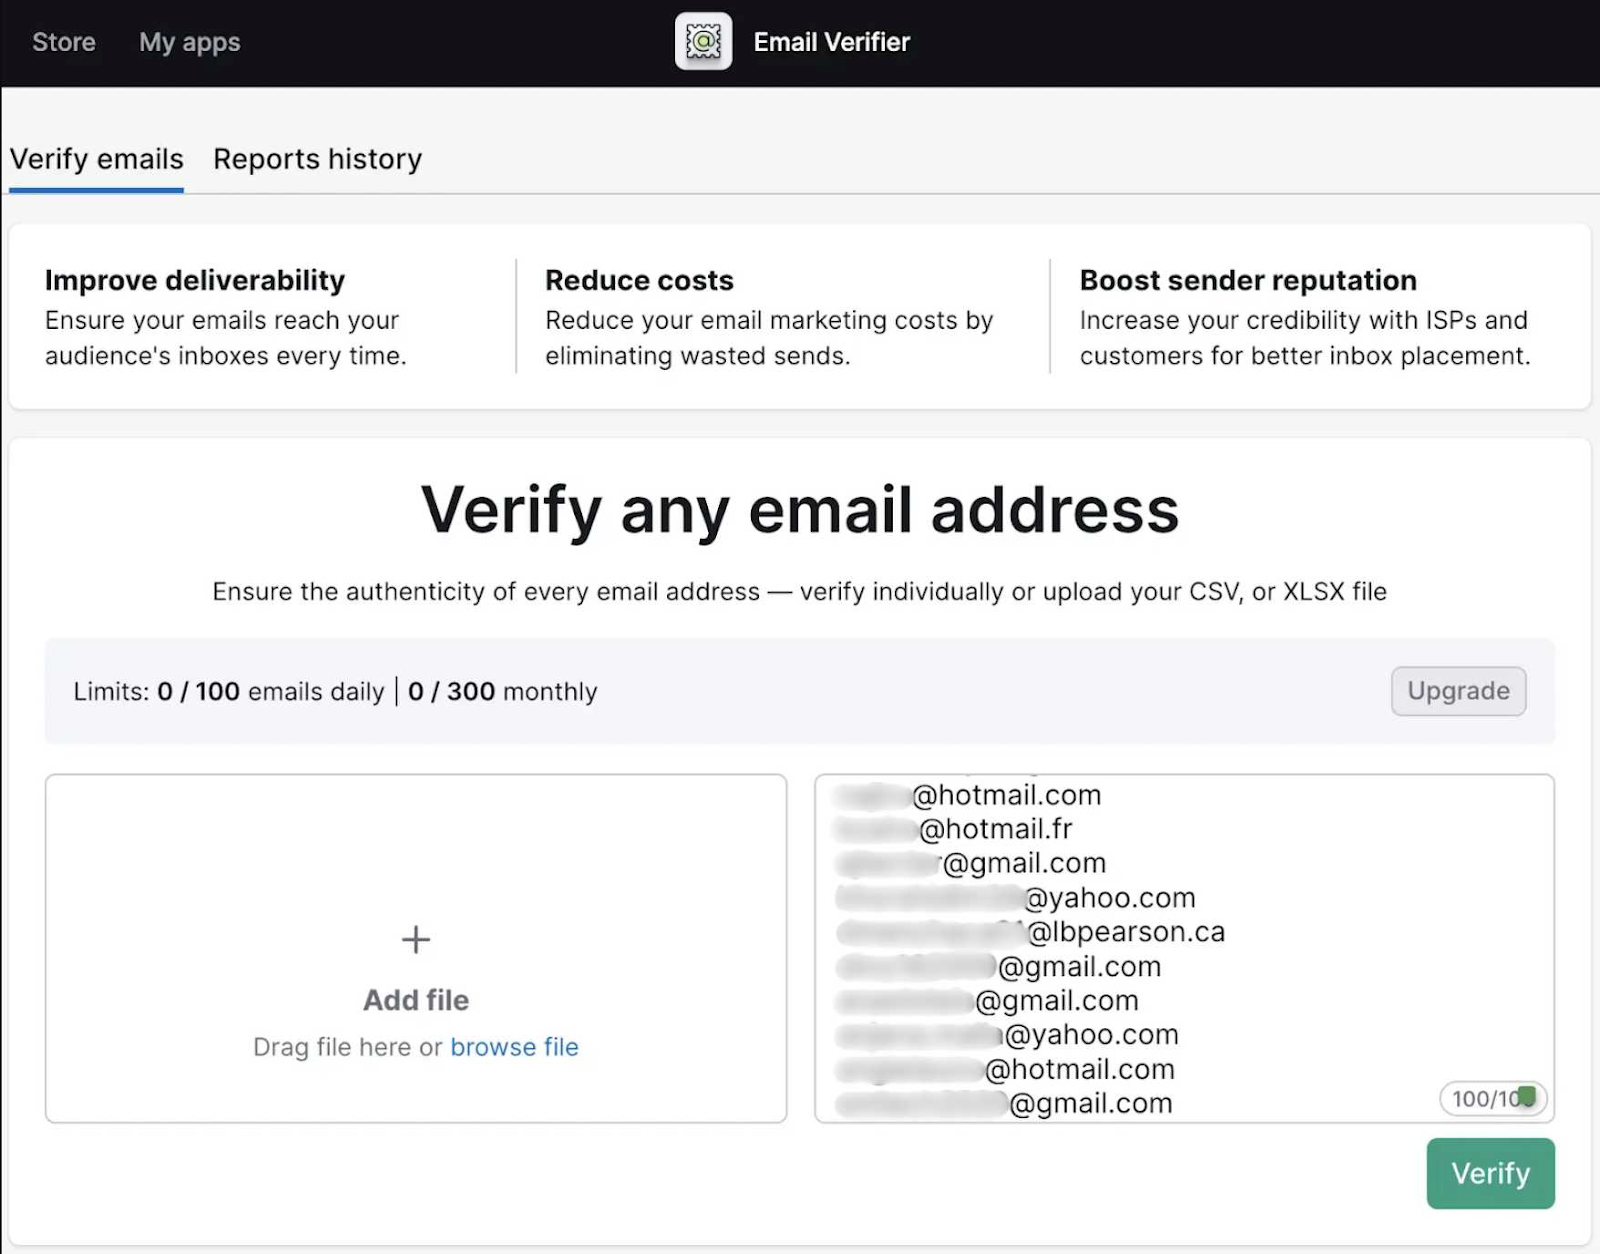 Email Verifier tool s،wing the ability to bulk verify email addresses.